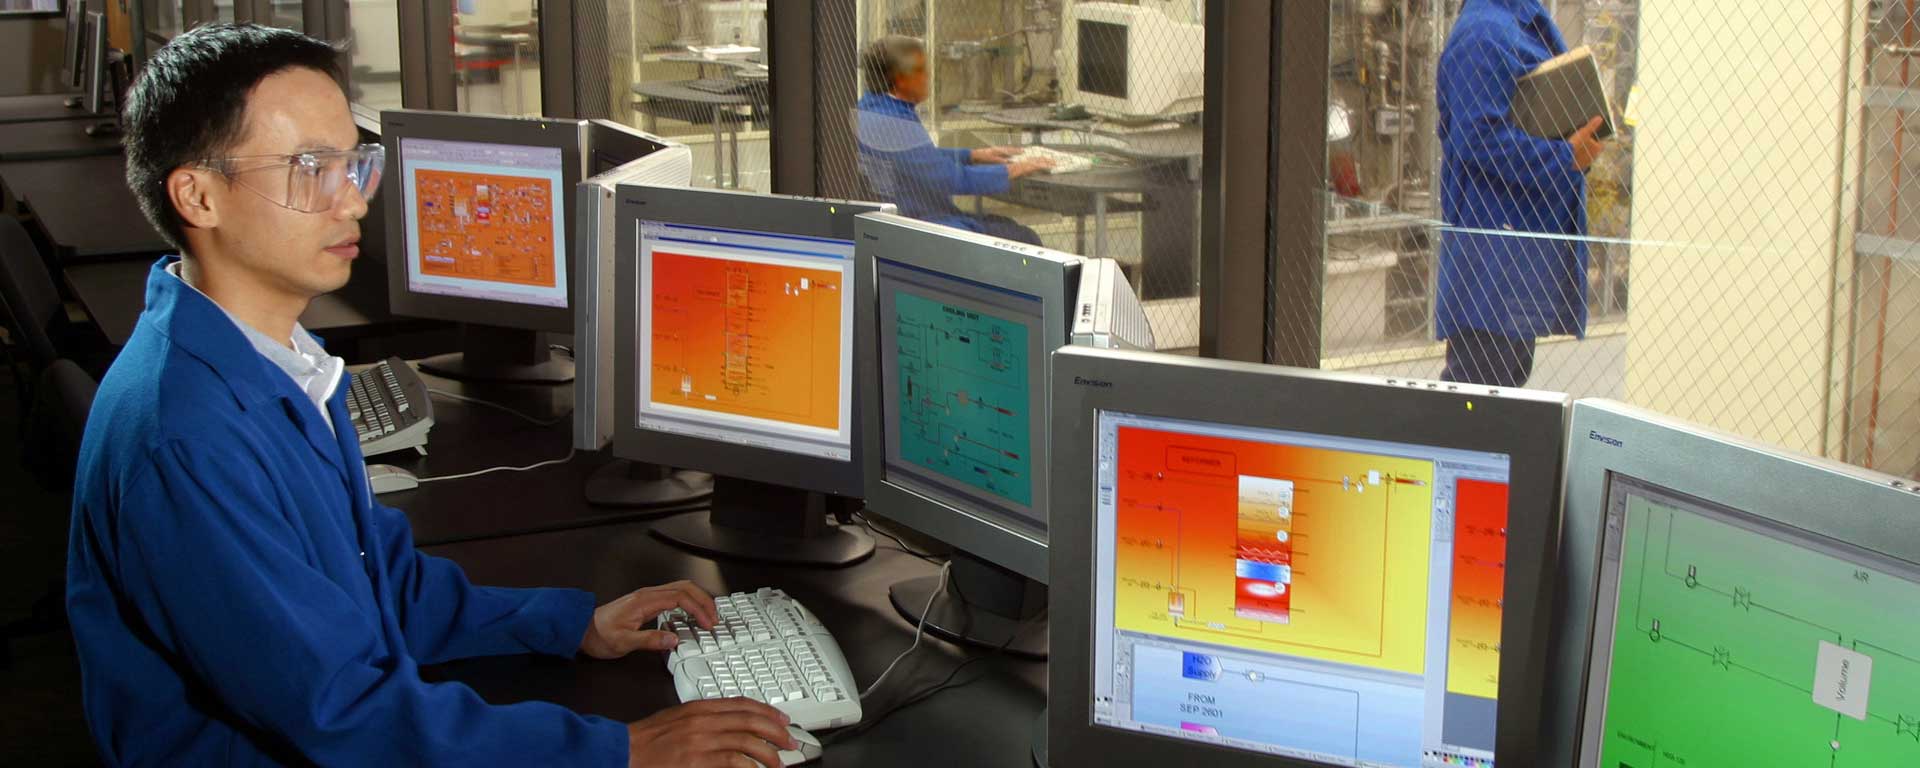 a computer technician working on various computer monitors